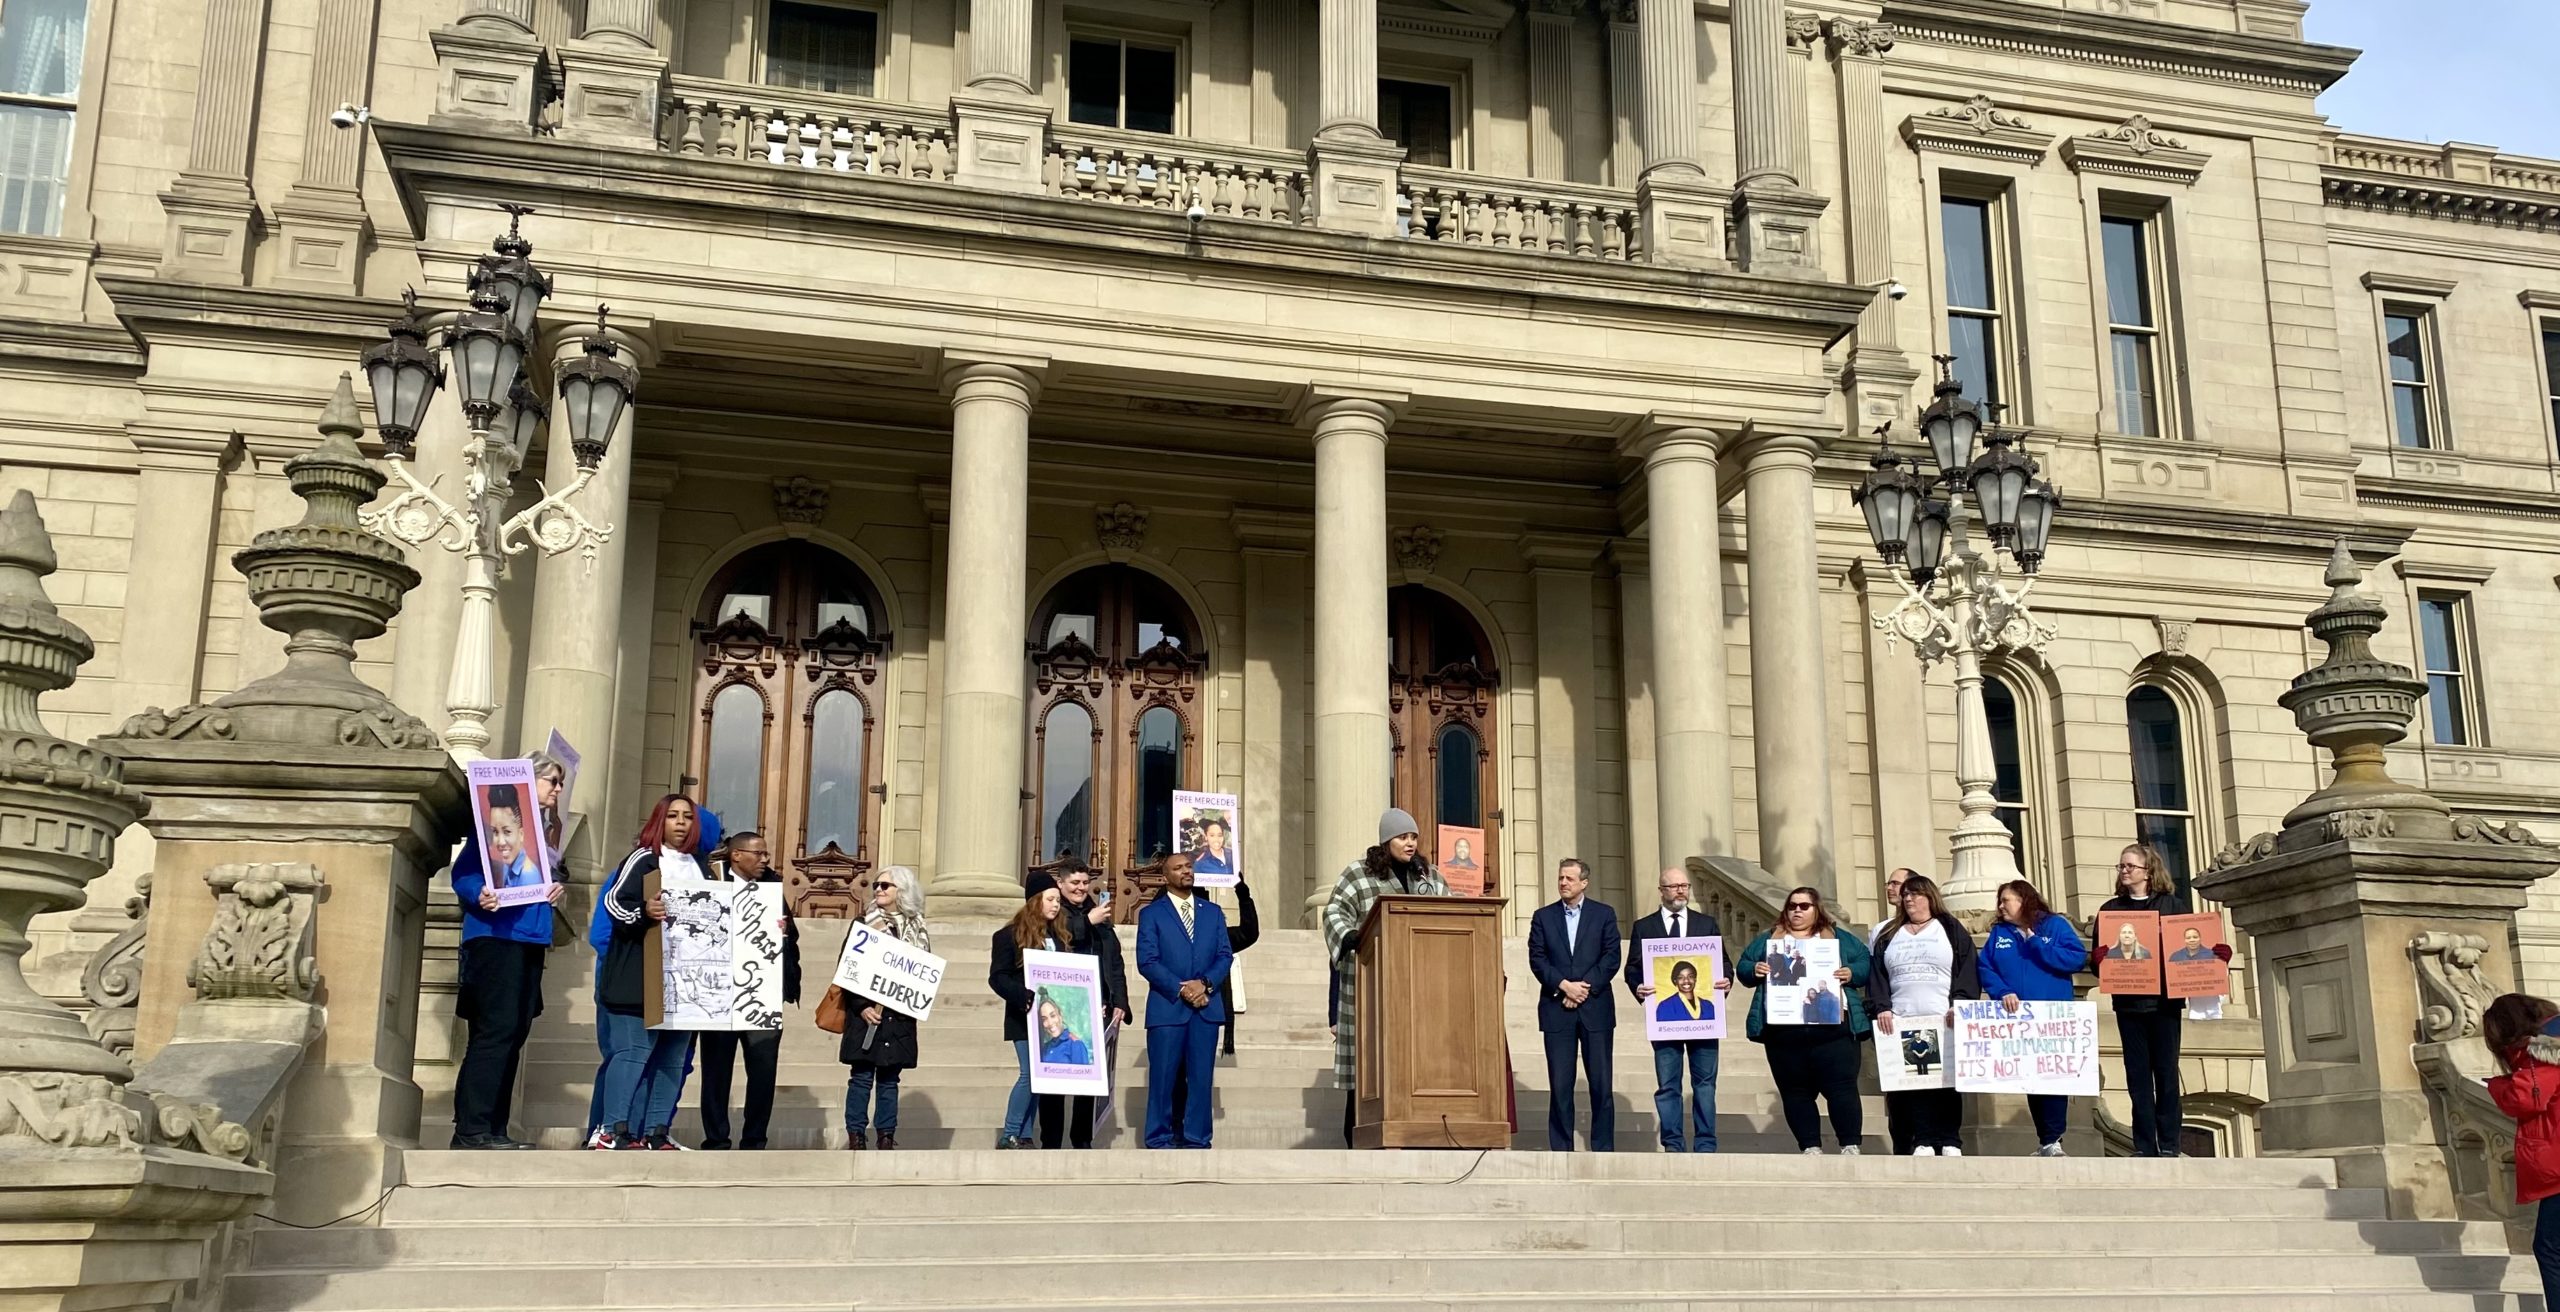 Image of rally on MI State capitol steps